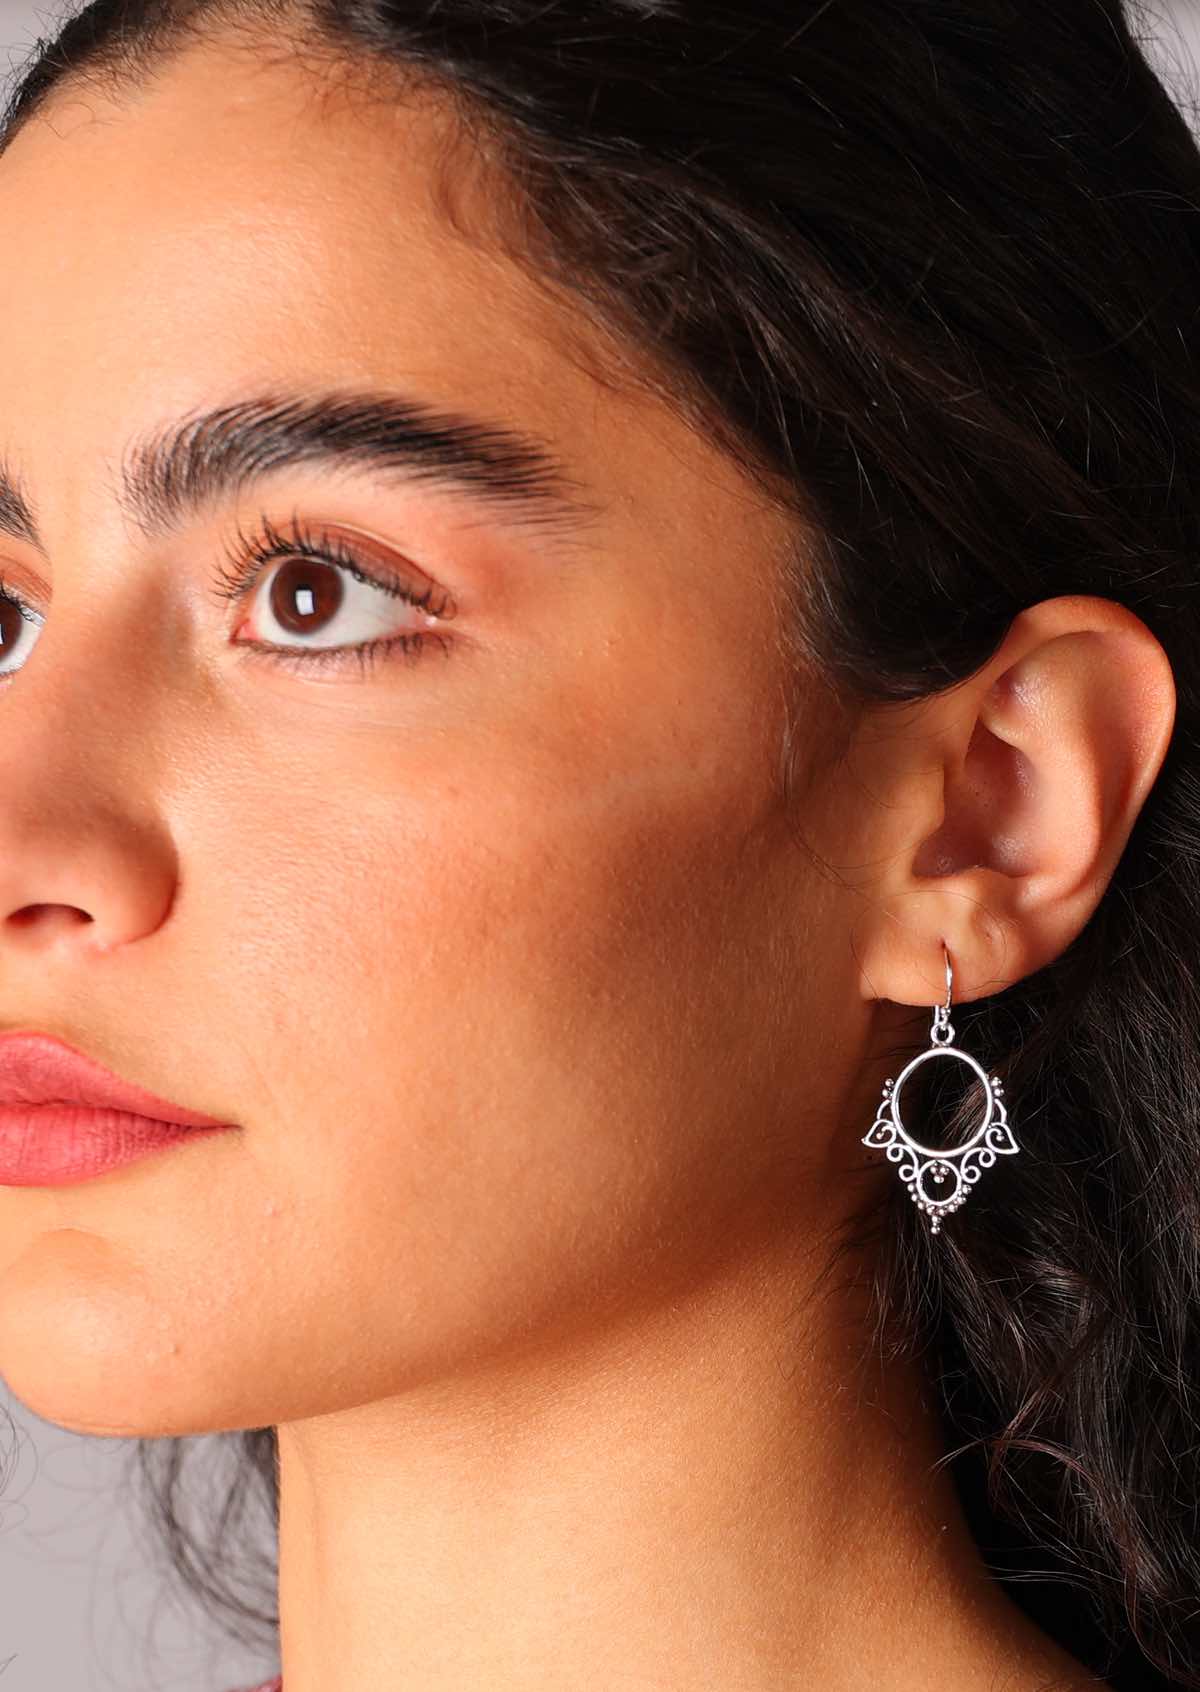 Sterling silver earrings feature a delicate hoop suspended from a wire hook, adorned with intricate detailing along the bottom half